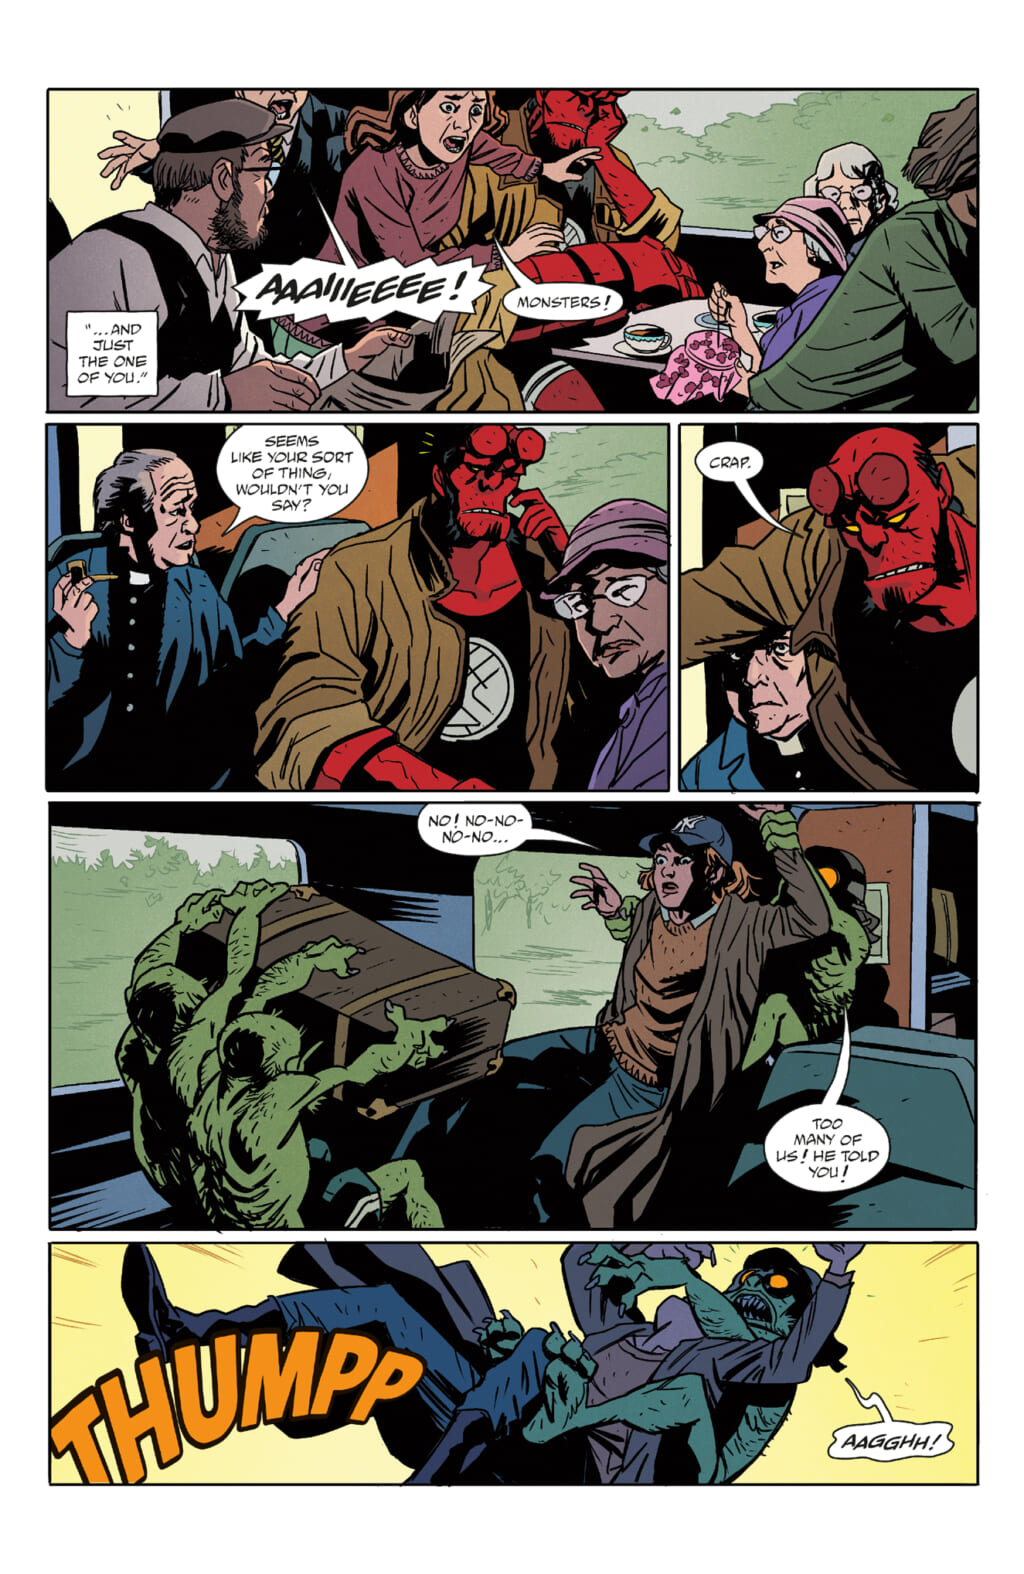 HBYLVE i1 PR BKP 4 1024x1574 - 'Hellboy' Creator Mike Mignola On The Film That Made Him Fall In Love With Monsters